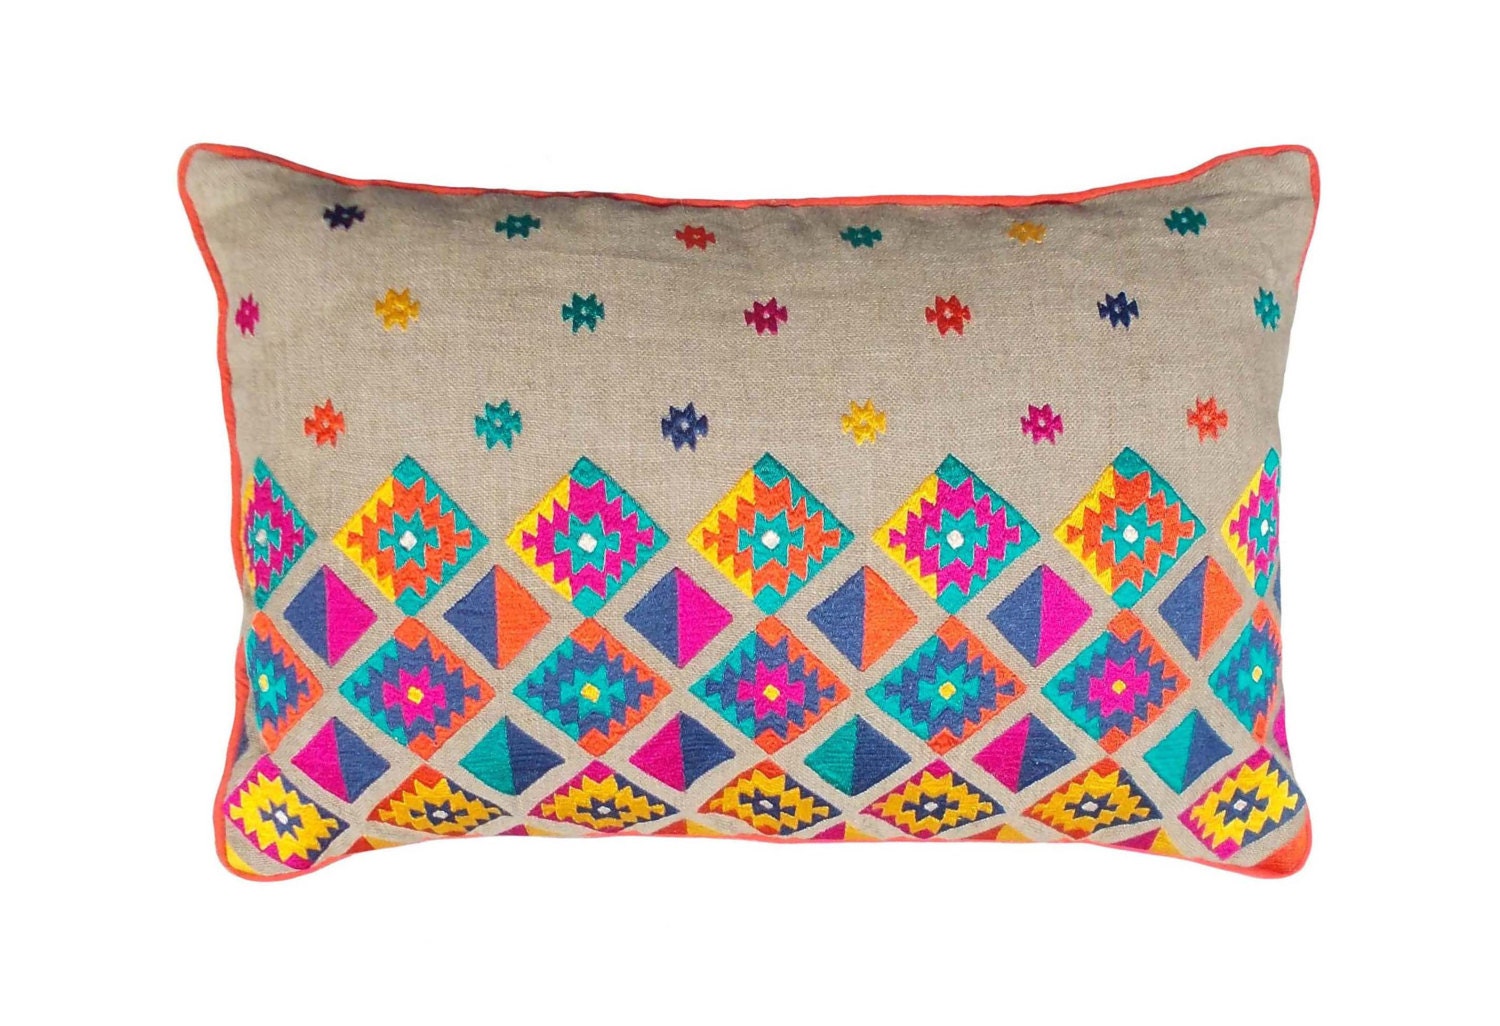 Popular items for aztec pillow on Etsy